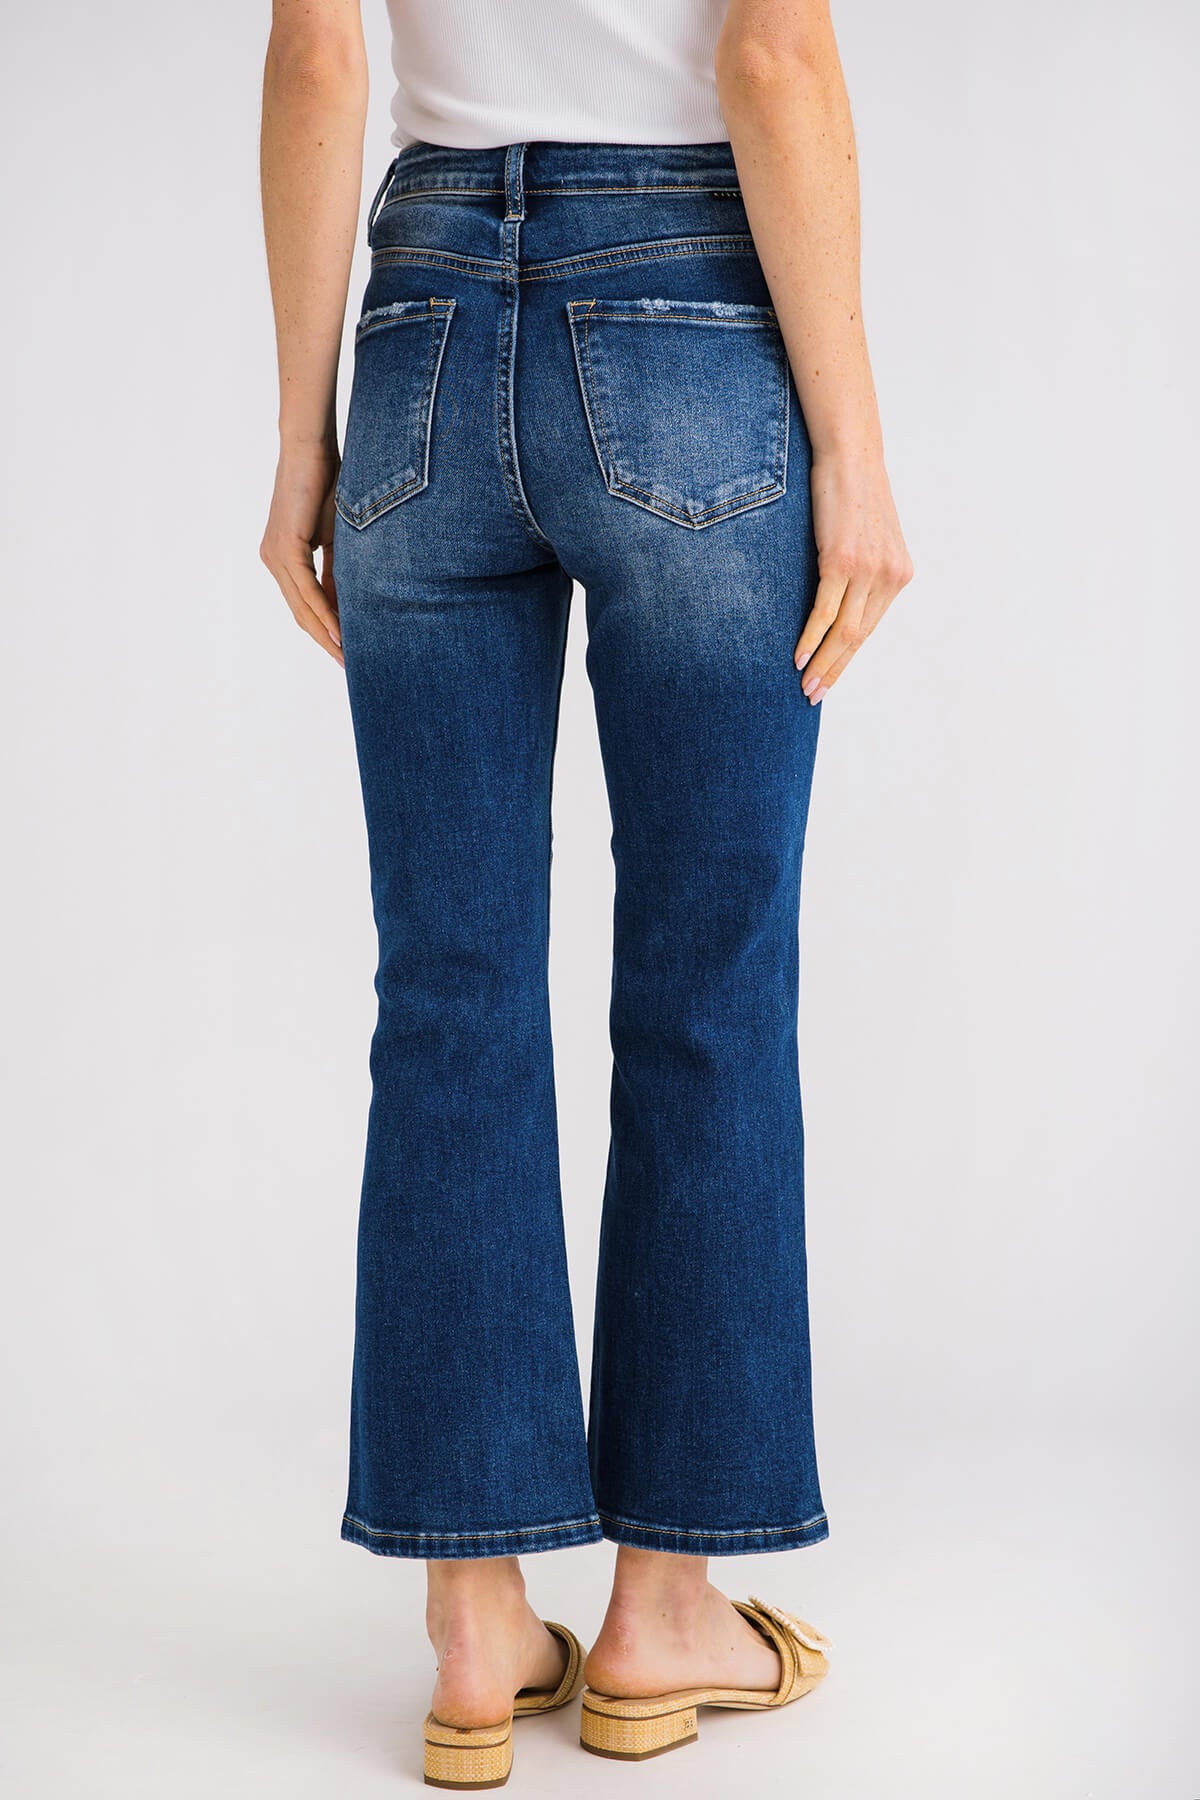 Risen Emily High Rise Ankle Bootcut Jeans